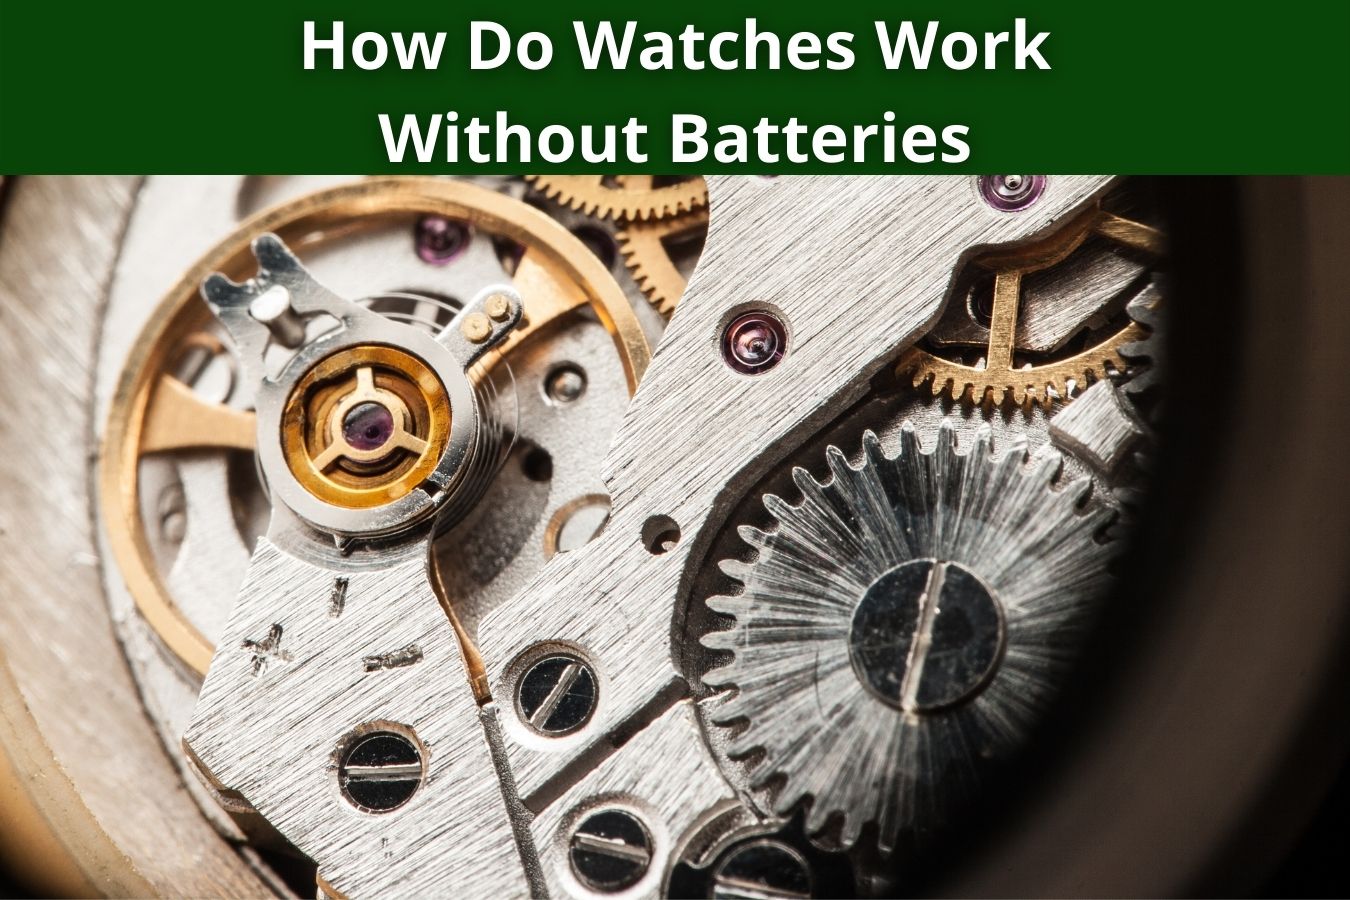 How Do Watches Work Without Batteries